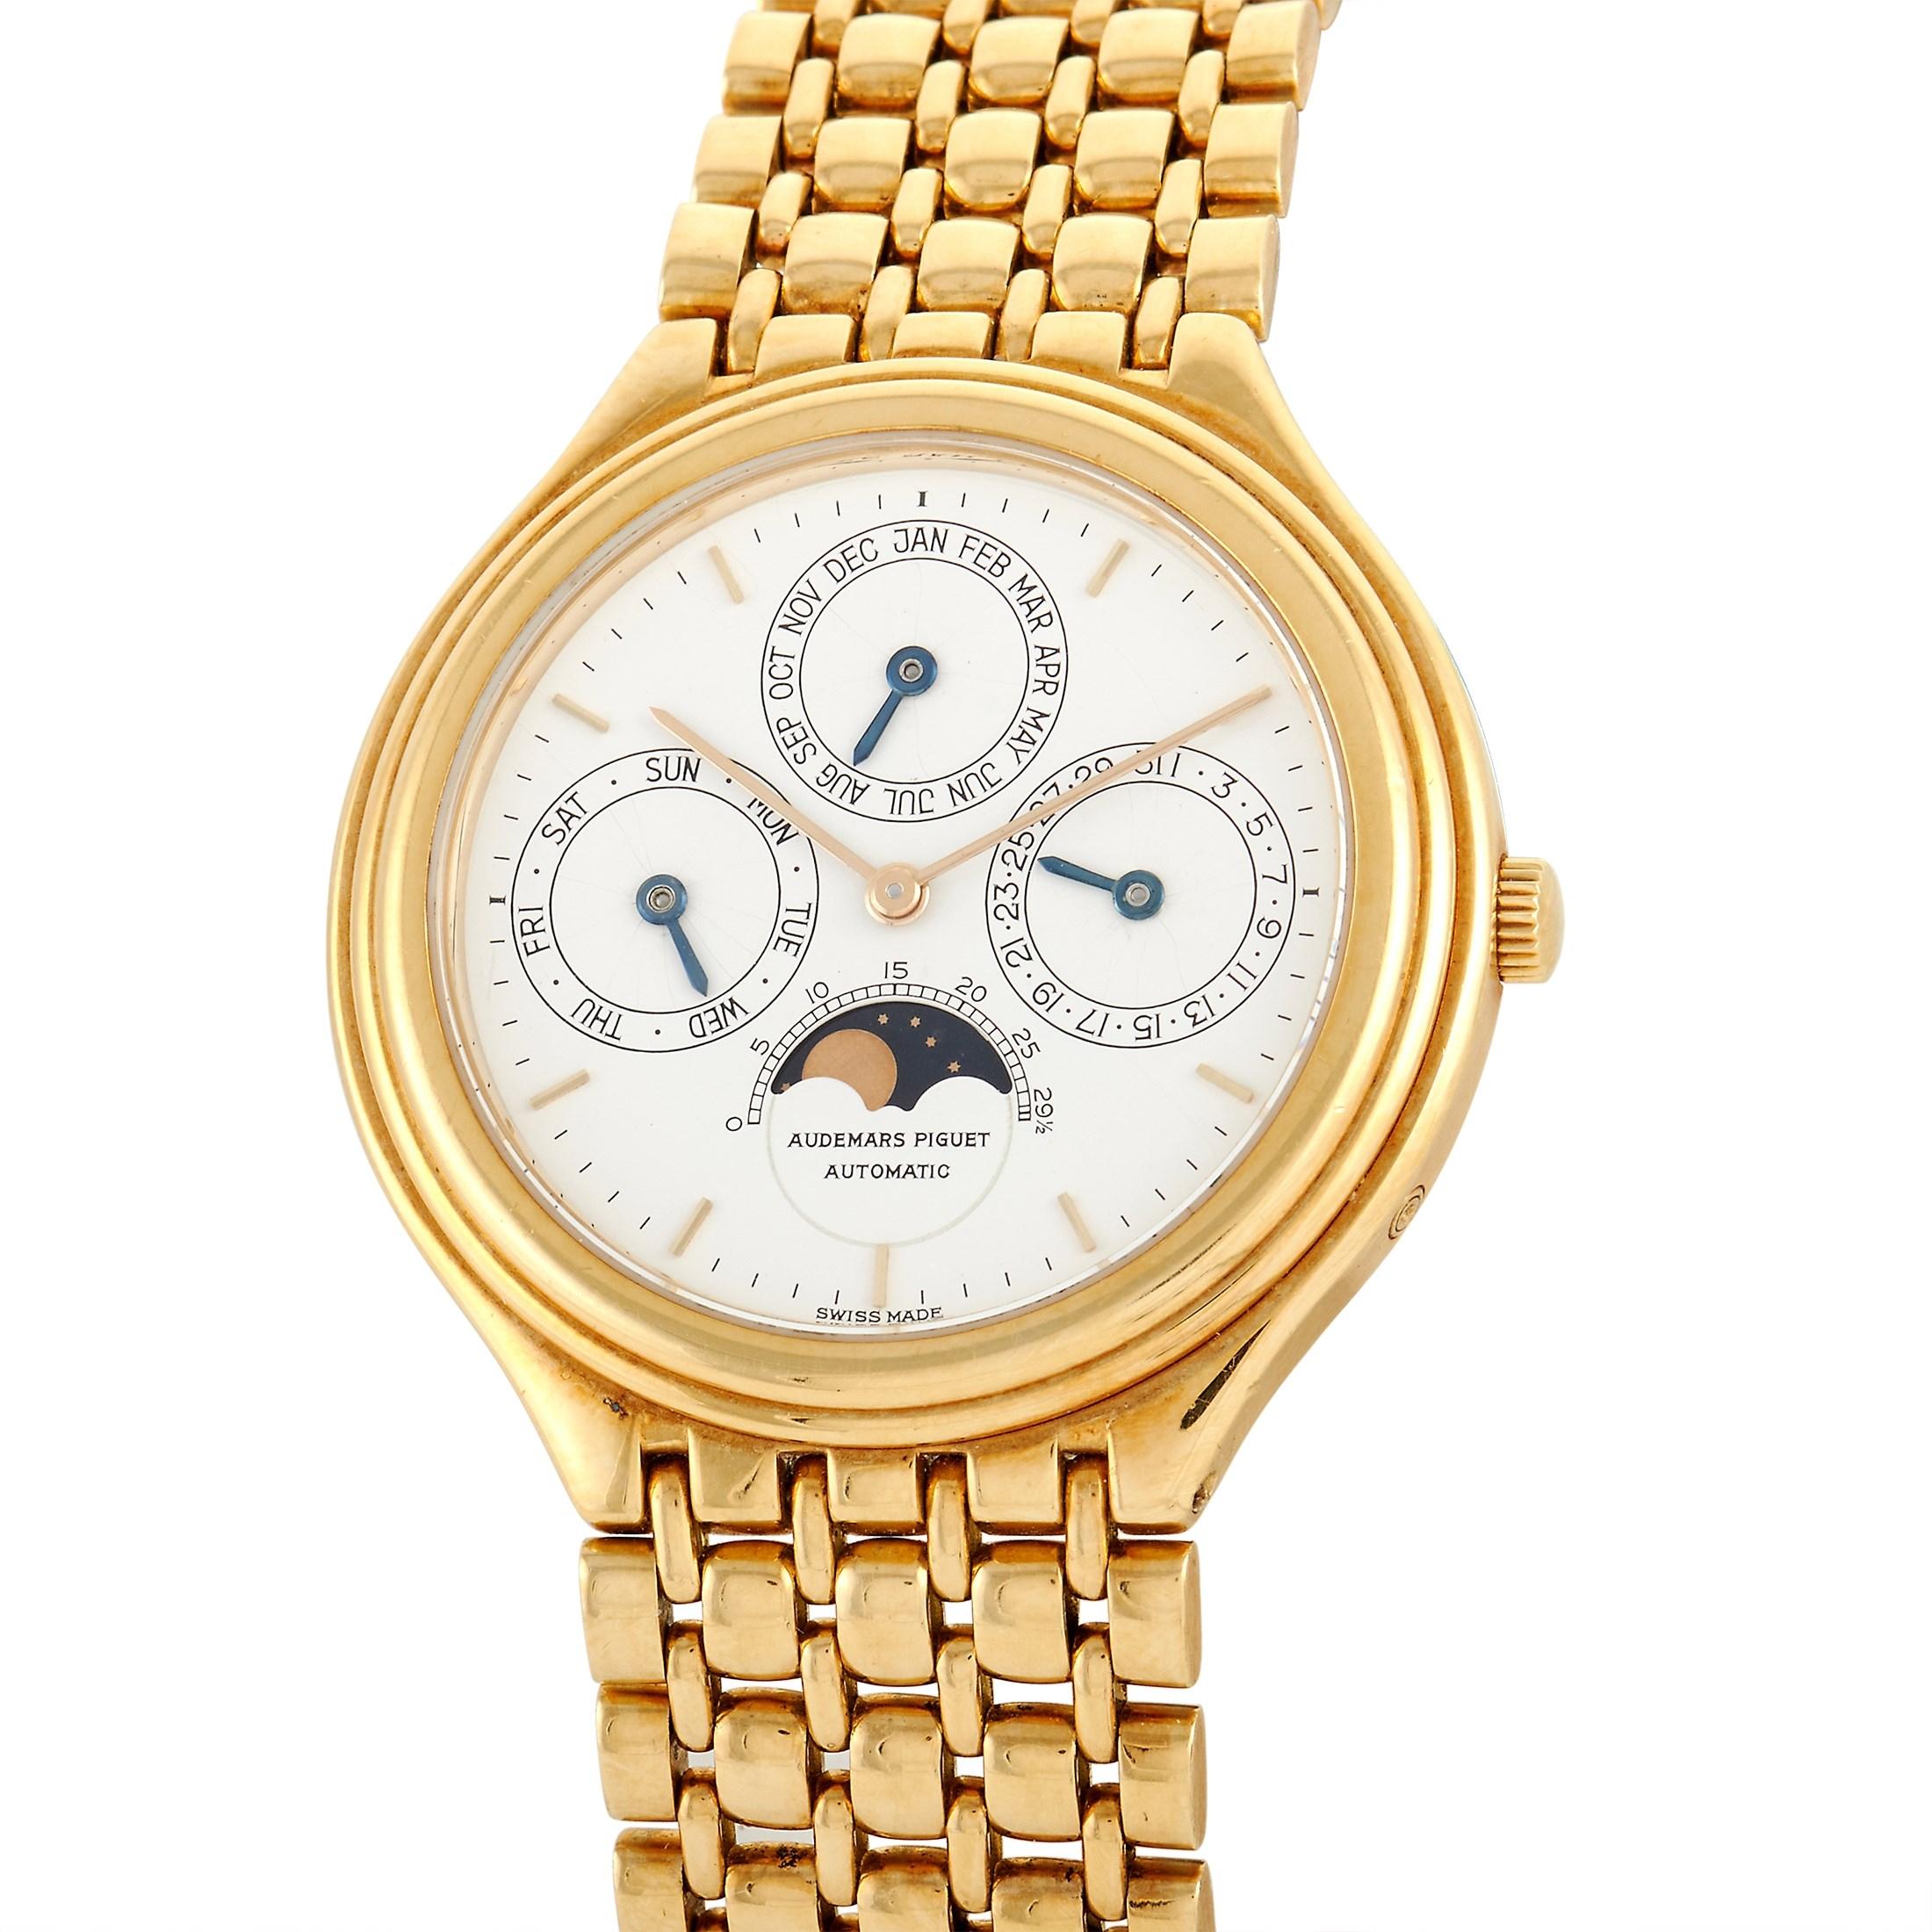 The Audemars Piguet Quantieme Perpetual Calendar Watch, reference number 15809, is a functional luxury timepiece that will never let you down. 

Sleek and stylish, it features a bracelet and 36mm case crafted from opulent 18K yellow gold. On the